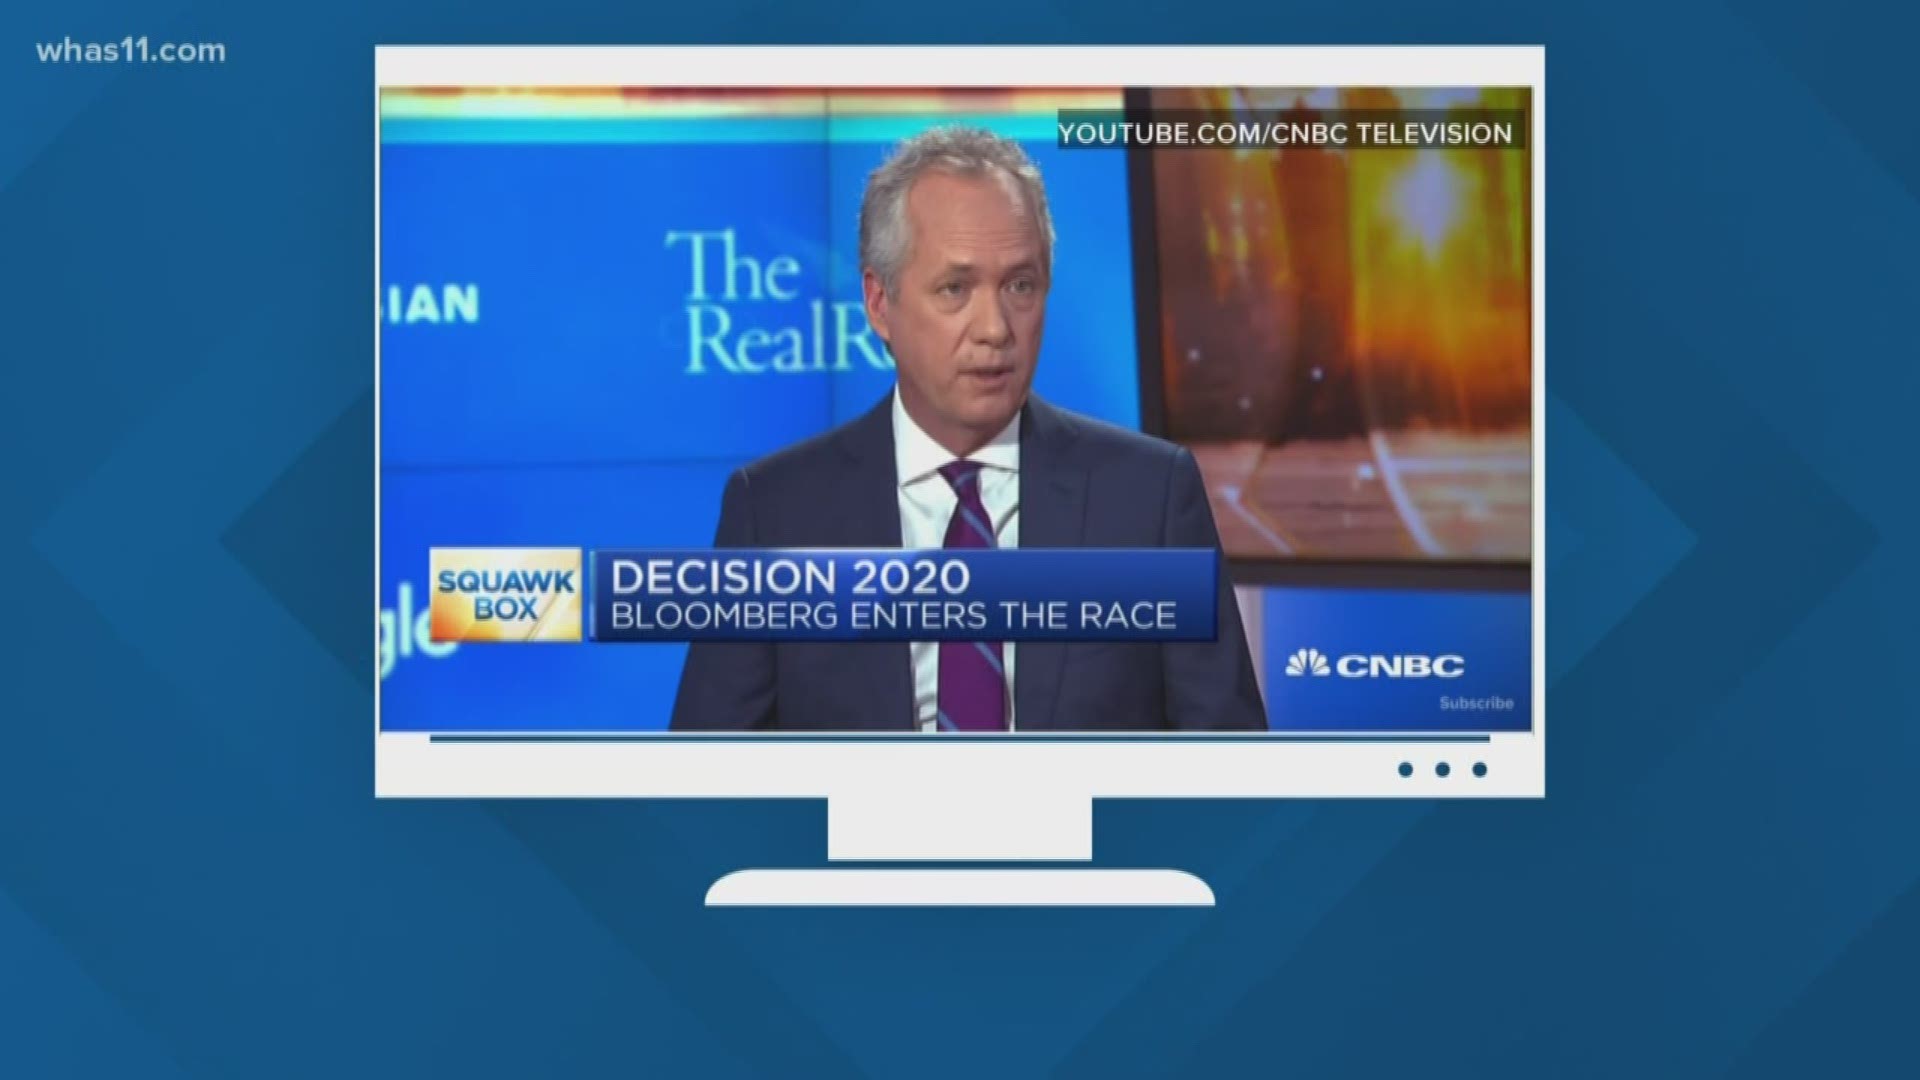 Fischer was on CNBC's Squawk Box this morning to advocate for the former New York City mayor.